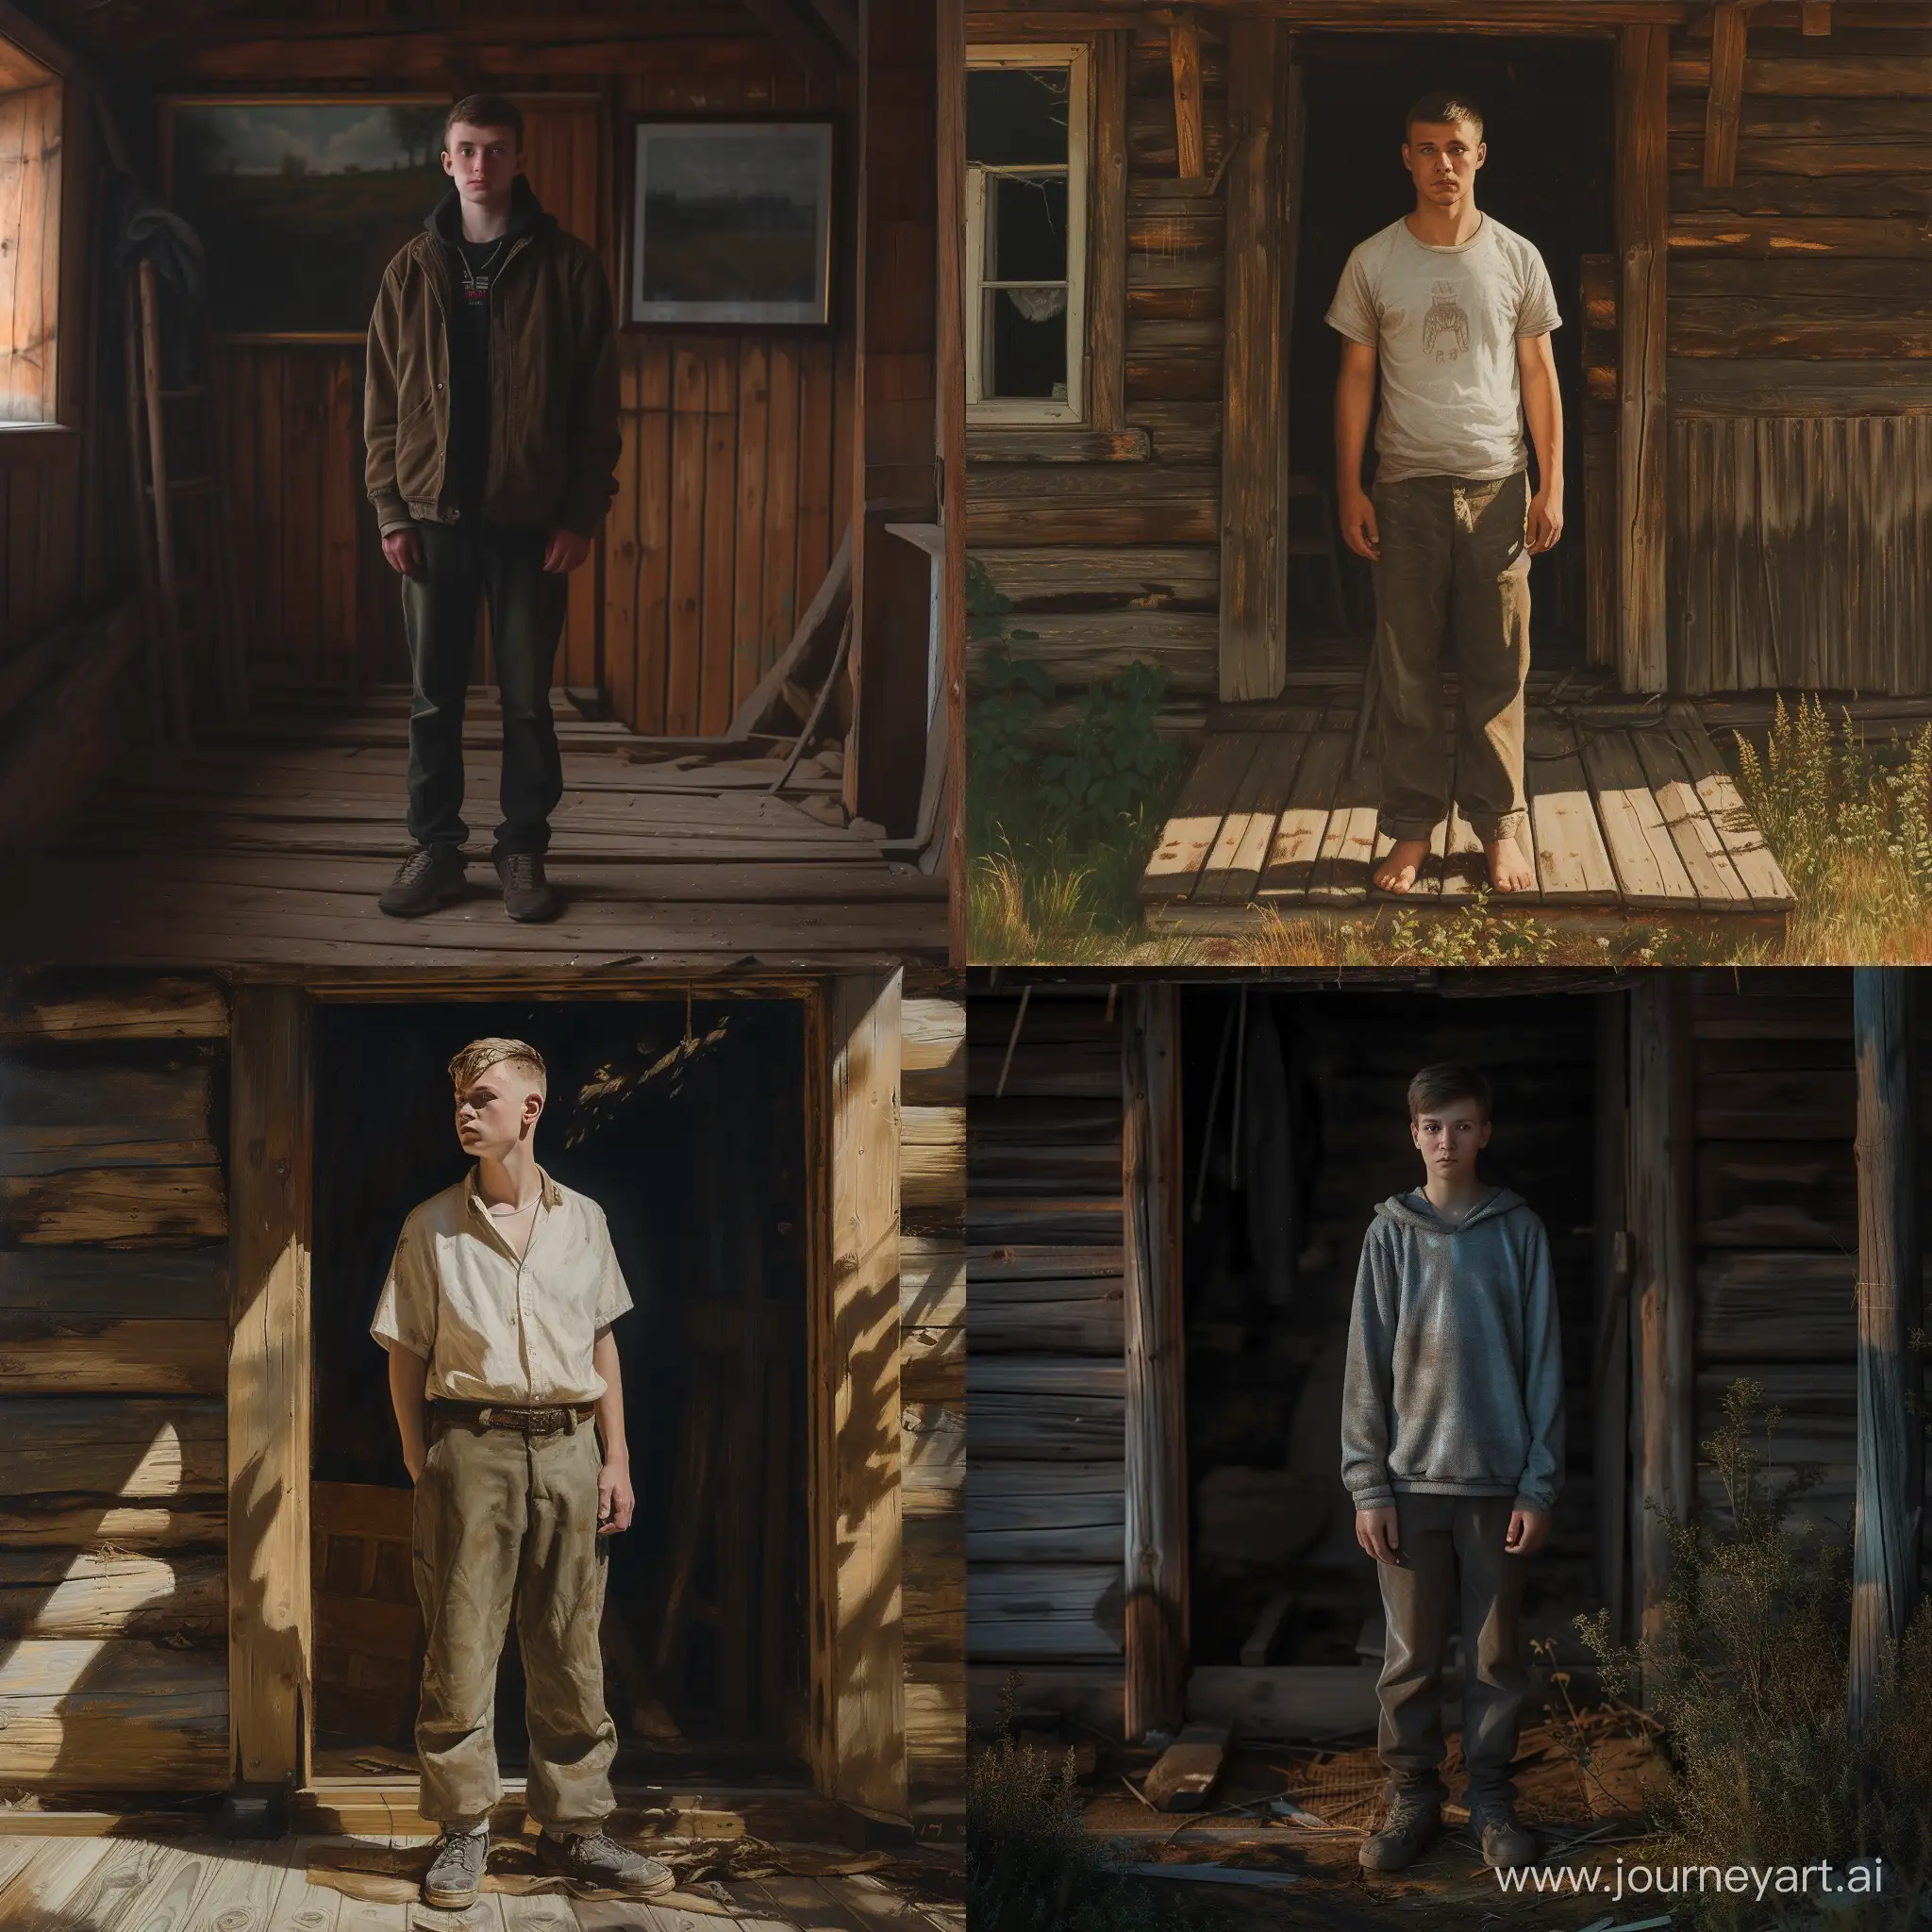 Polish-Teenager-Poses-Proudly-in-Traditional-Wooden-House-Realistic-Photorealism